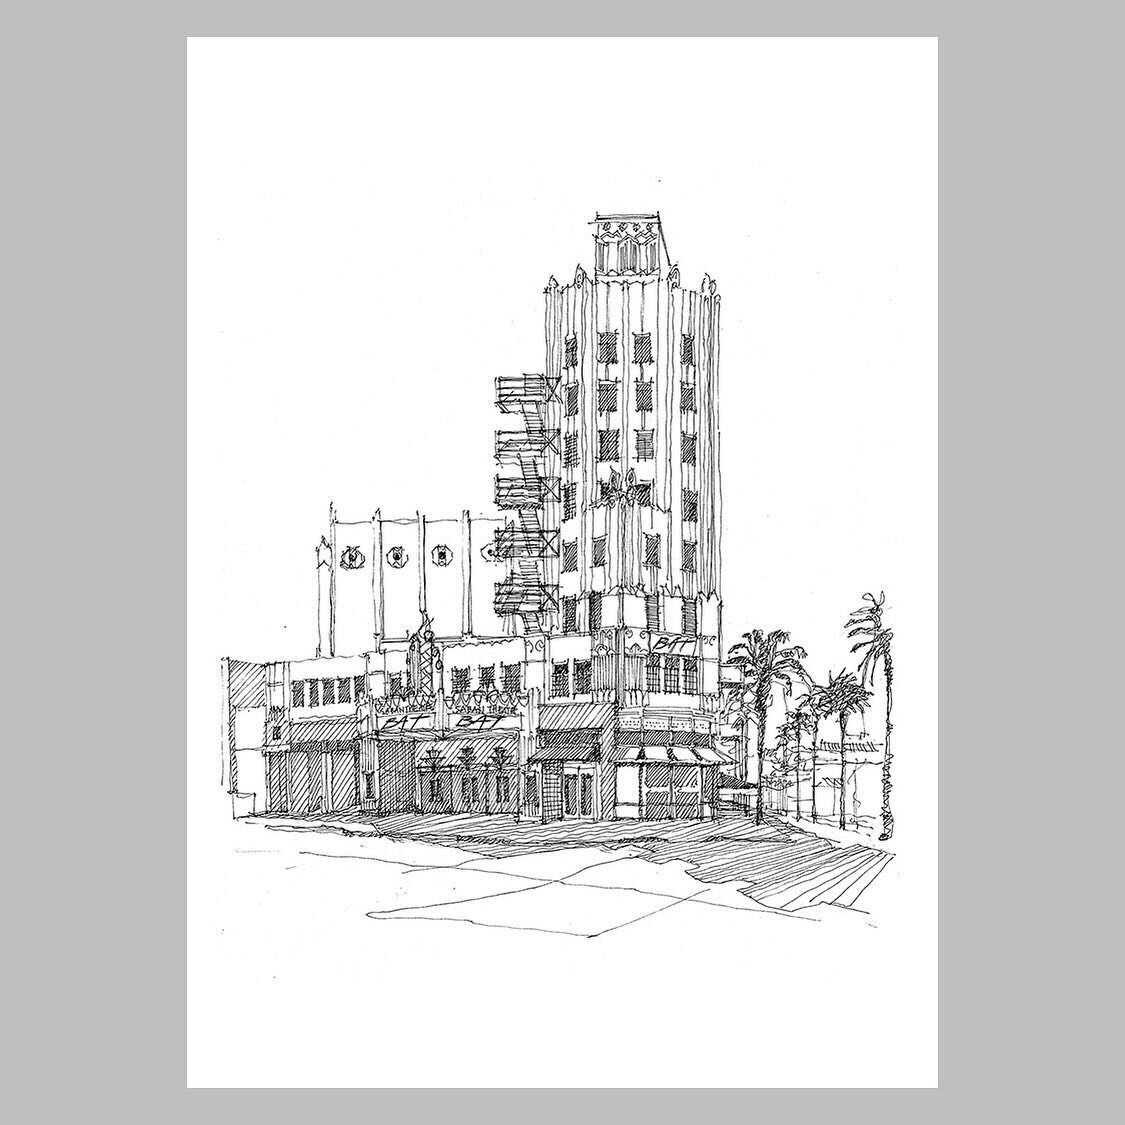 The Saban Theatre, drawn en plein air (on location) in my sketchbook, features the historic, art deco building and details. Printed to order in my studio at 5&rdquo;x 7&rdquo;

This drawing is part of a series capturing Beverly Hills, available as pr